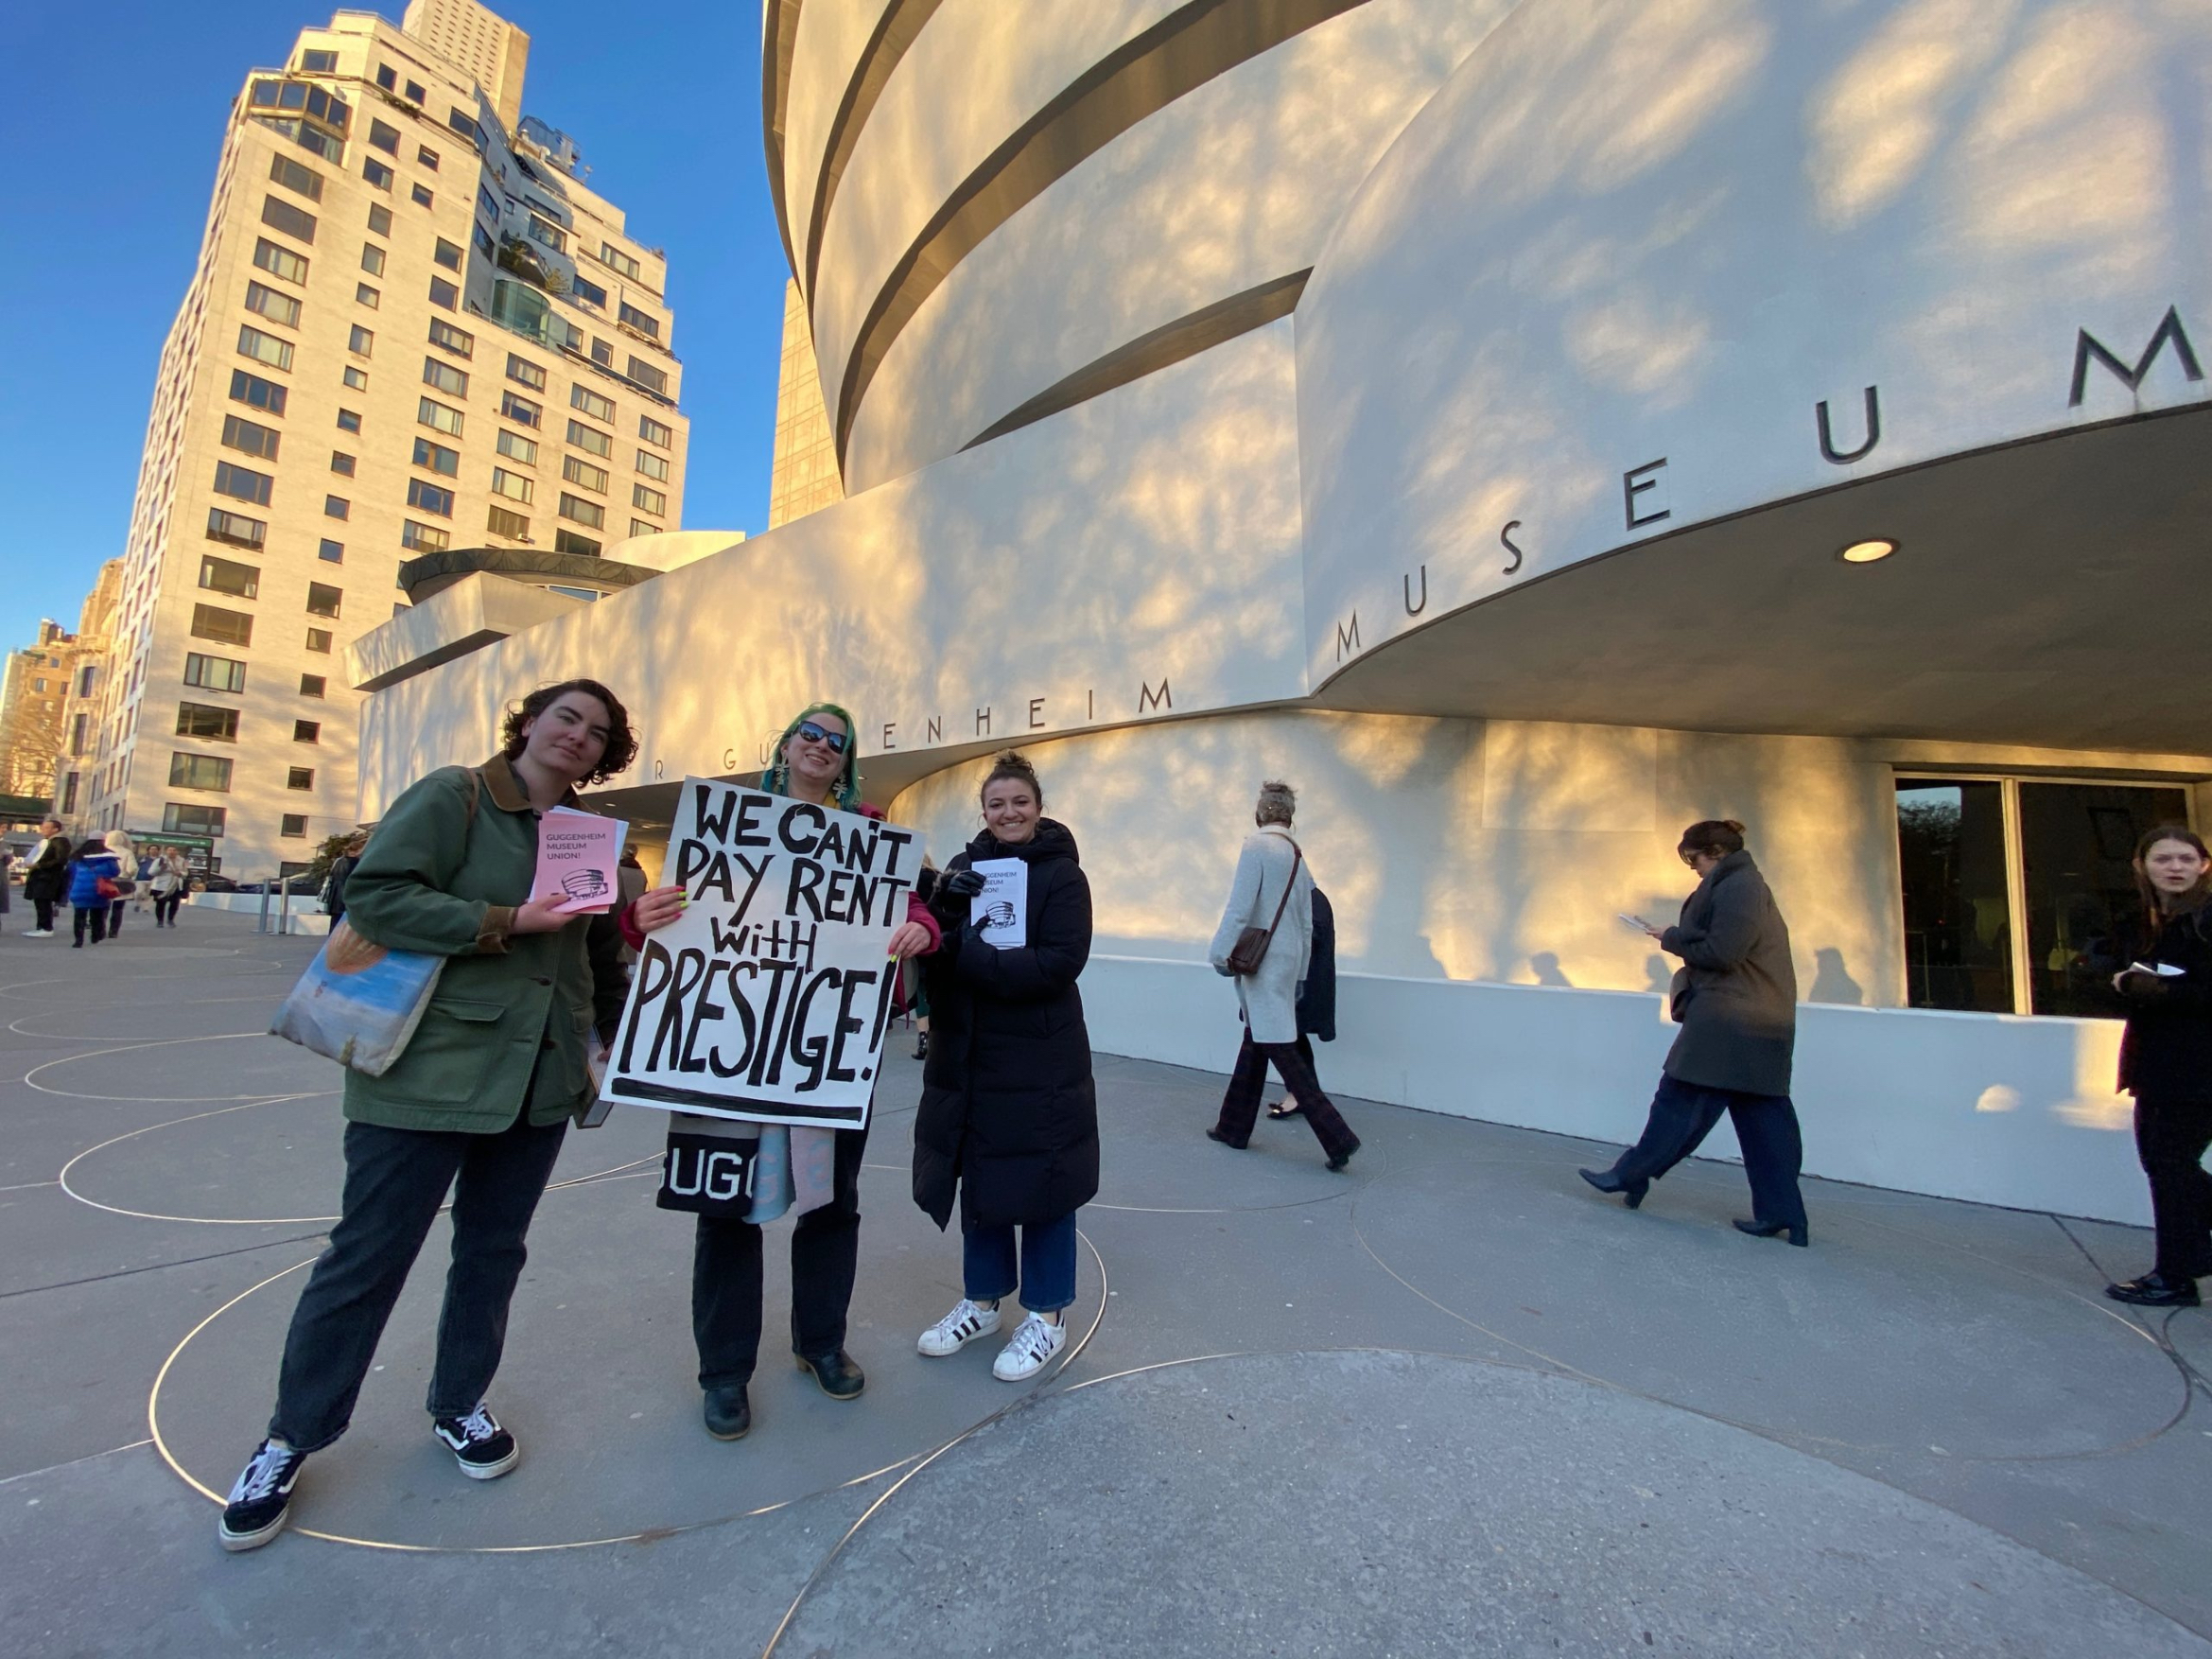 Take It or Leave It: The Brooklyn Museum Makes Its Final Contract